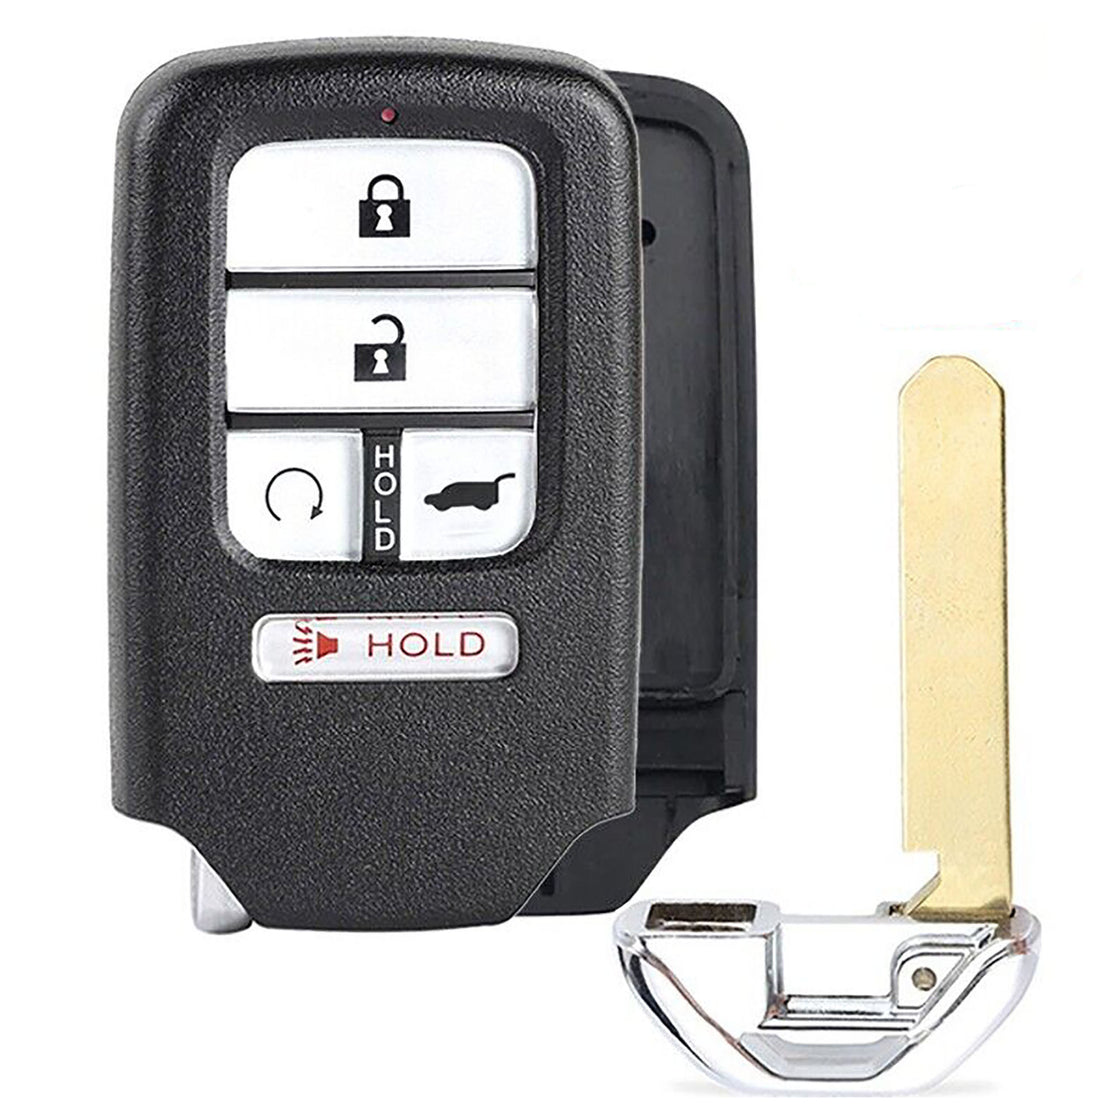 1x New Replacement Proximity Key Fob SHELL / CASE Compatible with & Fit For Honda Vehicles - MPN KR5V2X-SHELL-06 (NO electronics or Chip inside)